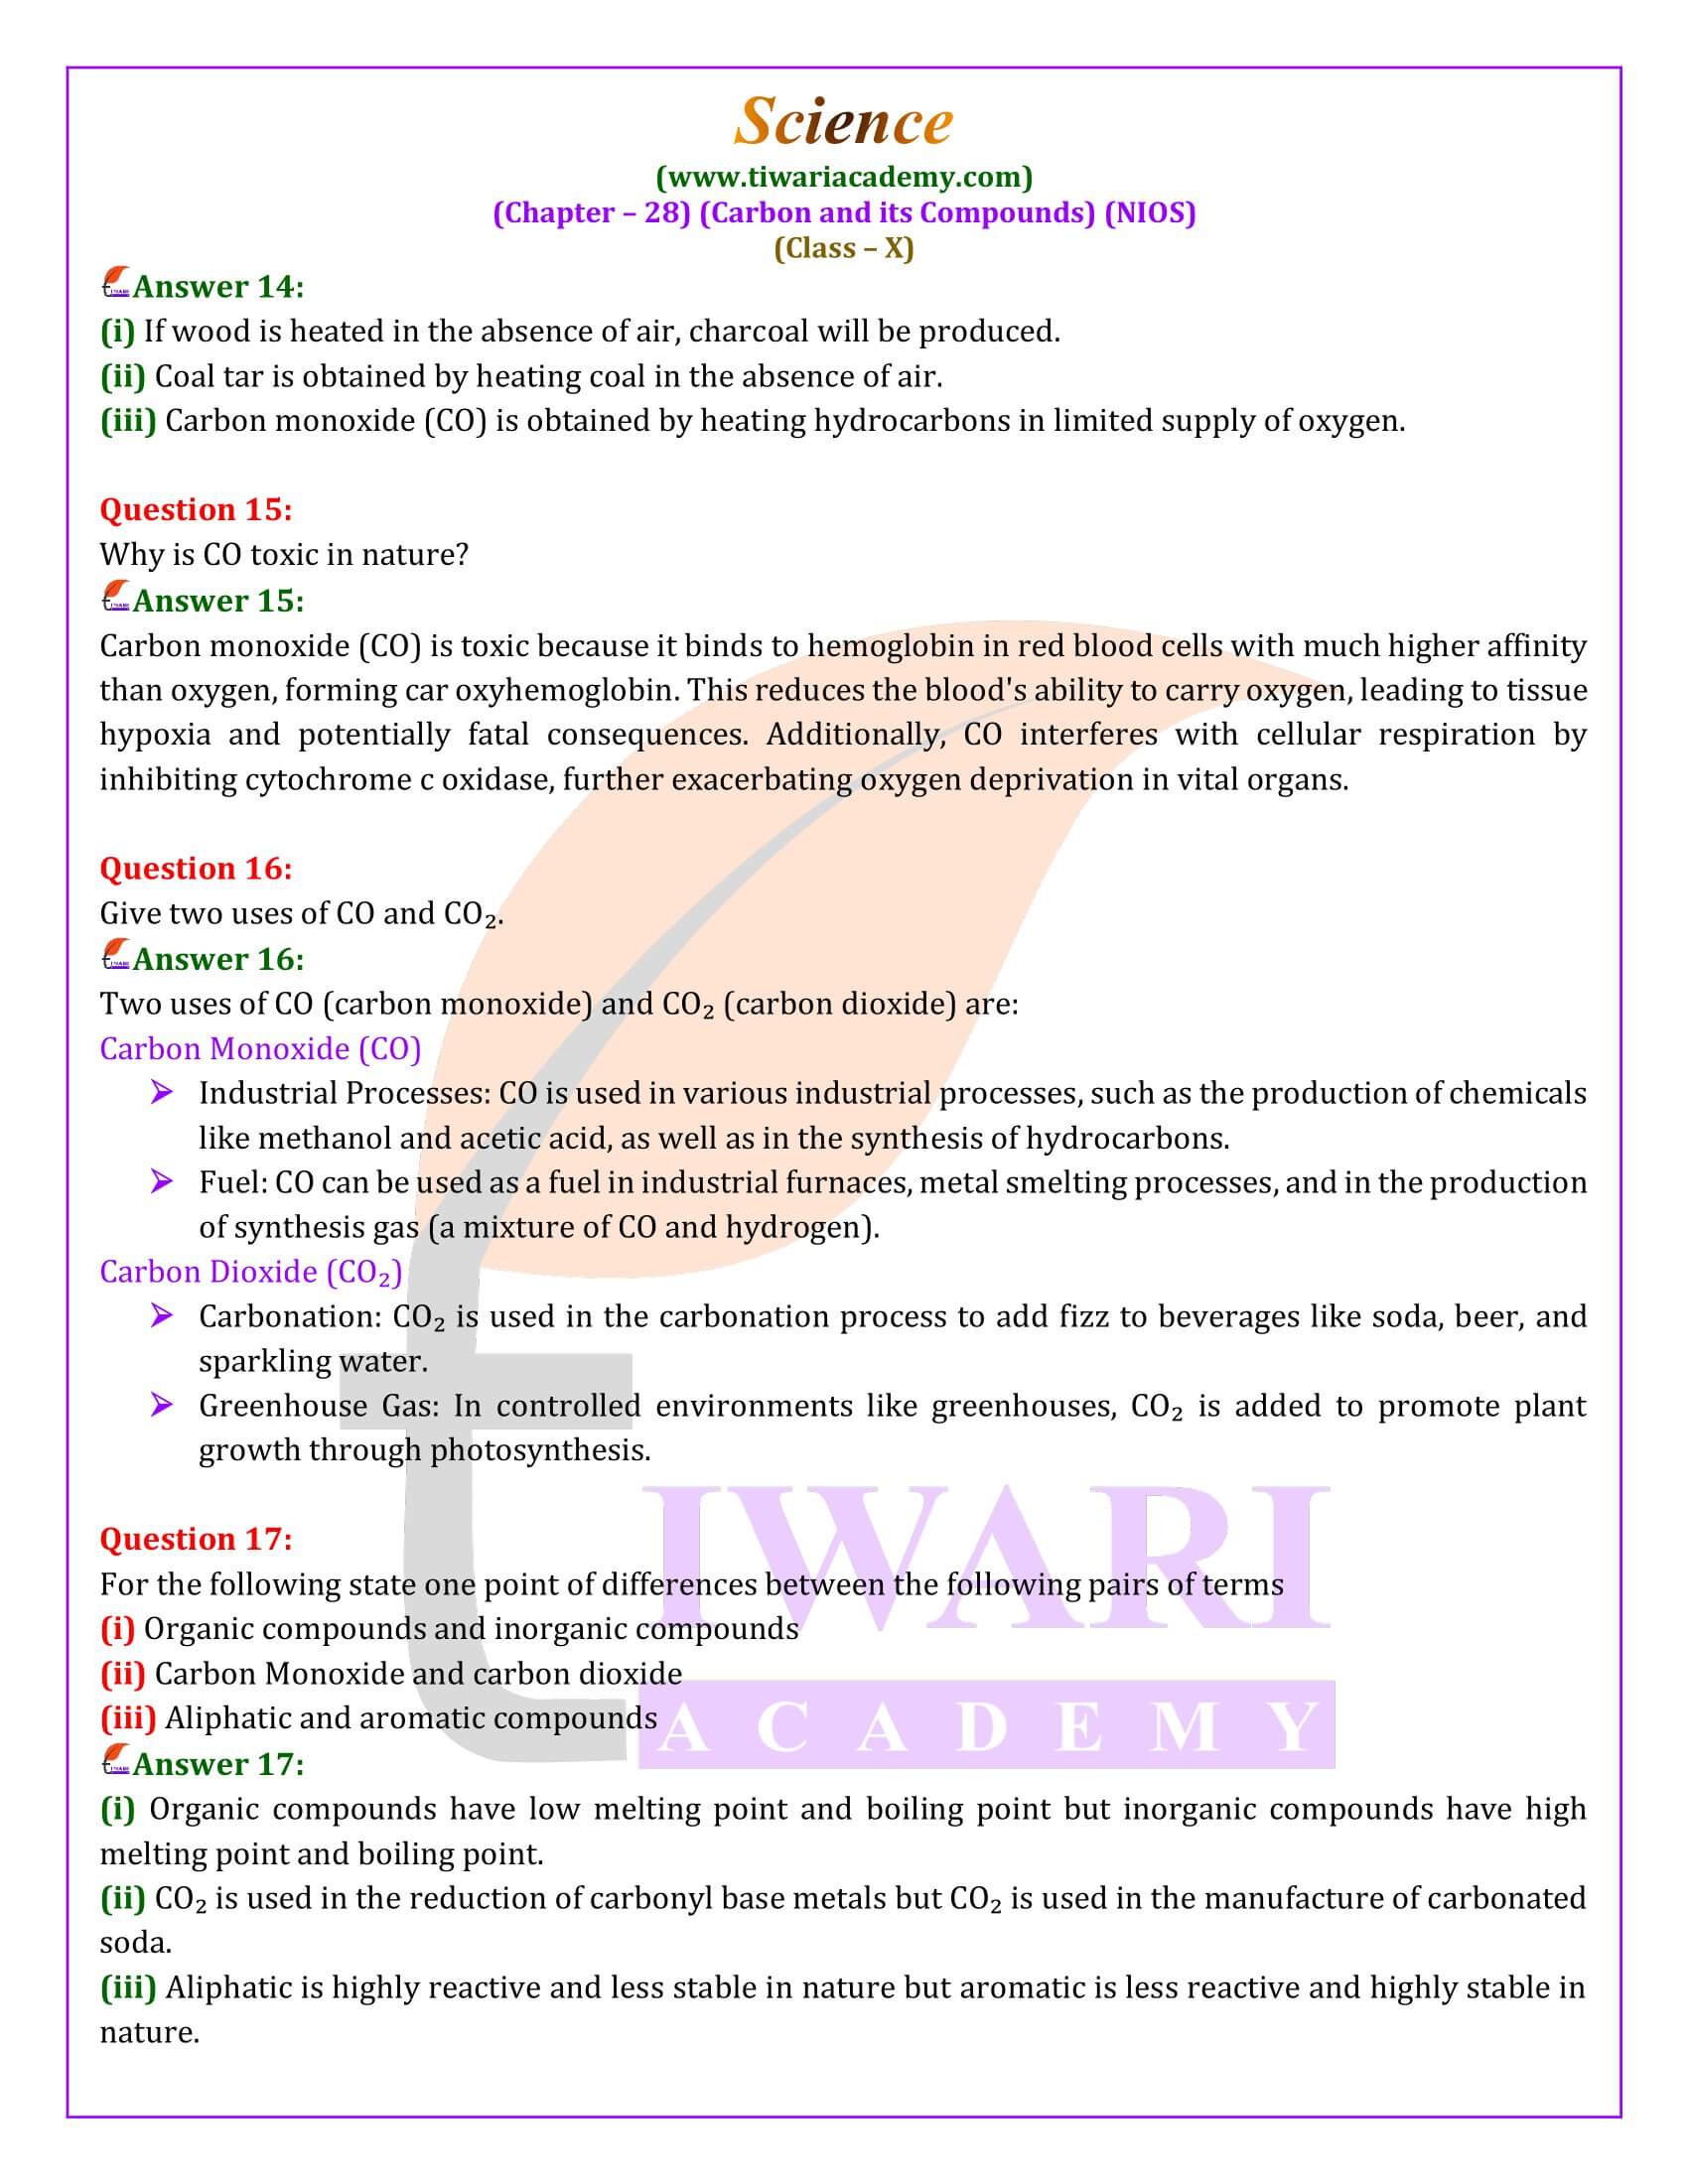 NIOS Class 10 Science Chapter 28 Guide in English